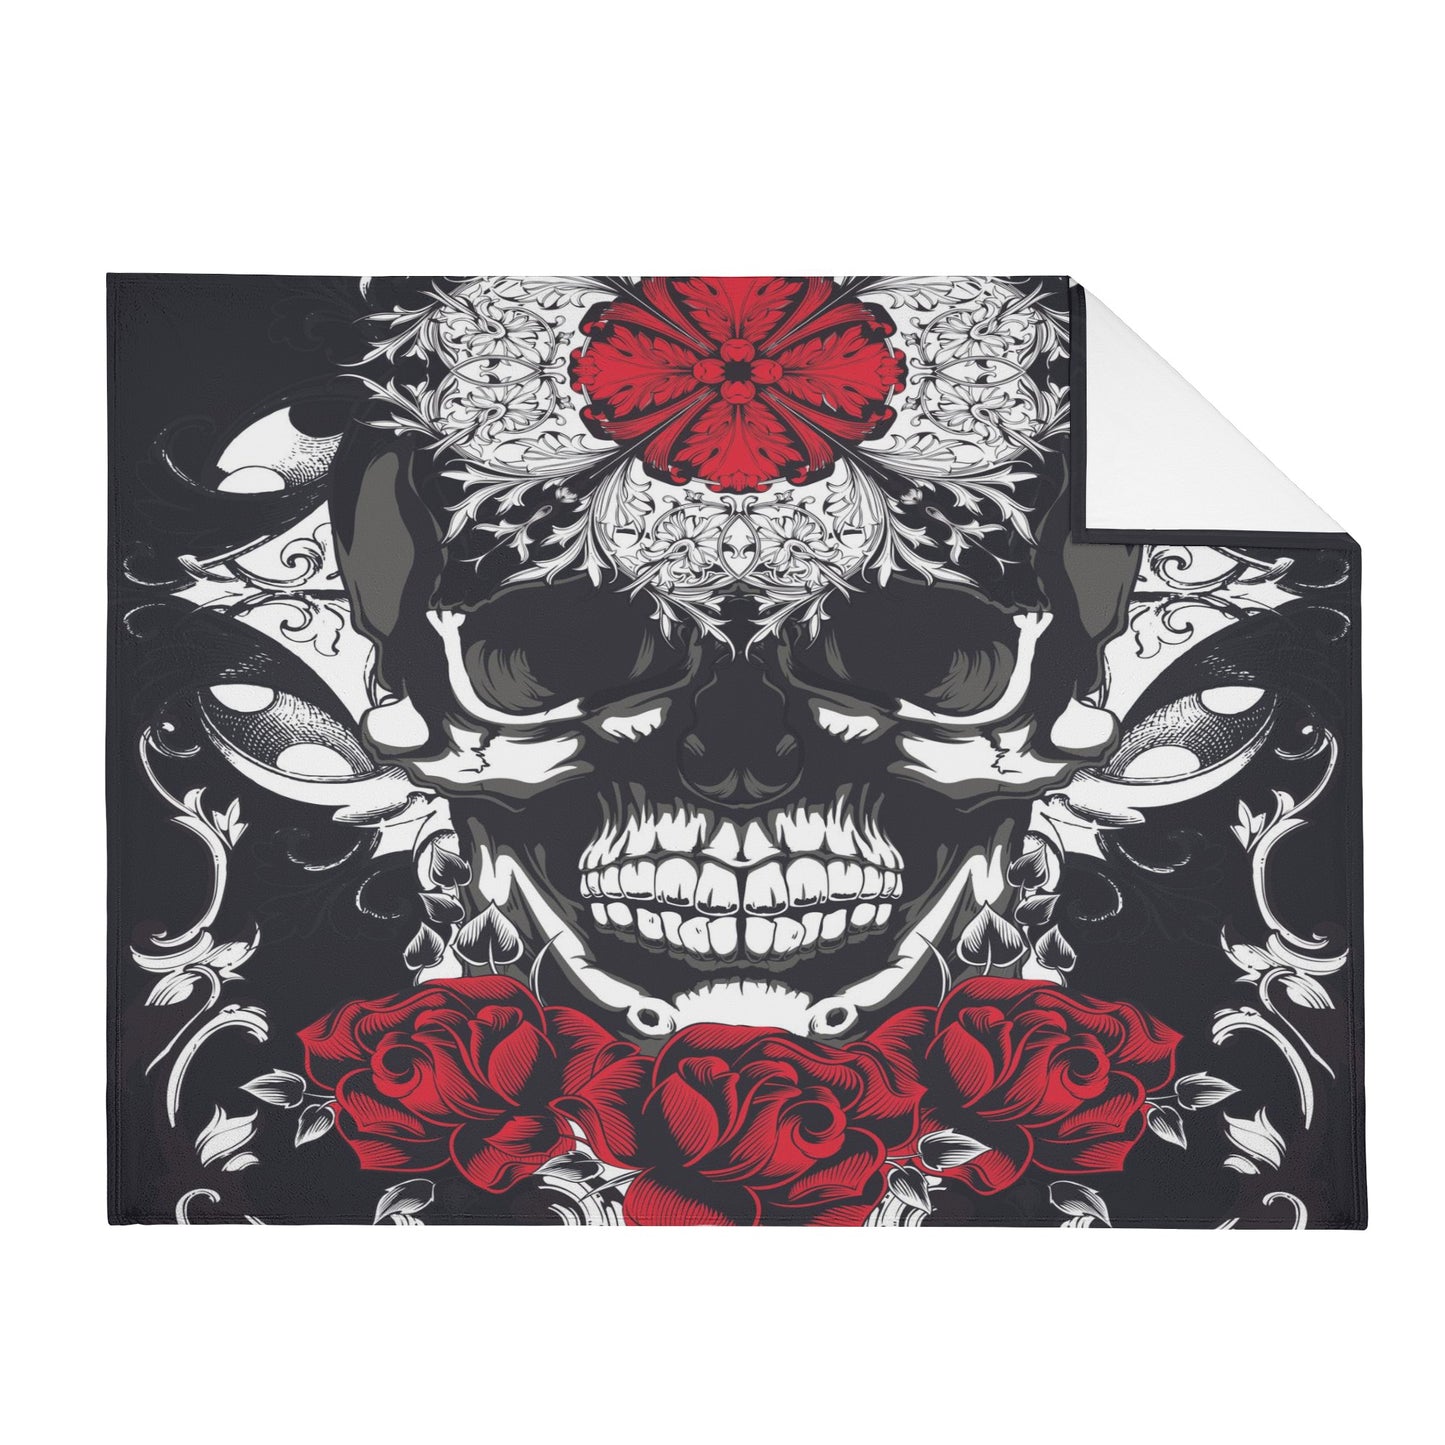 Gothic floral skull Horizontal Flannel Breathable Blanket 4 Sizes